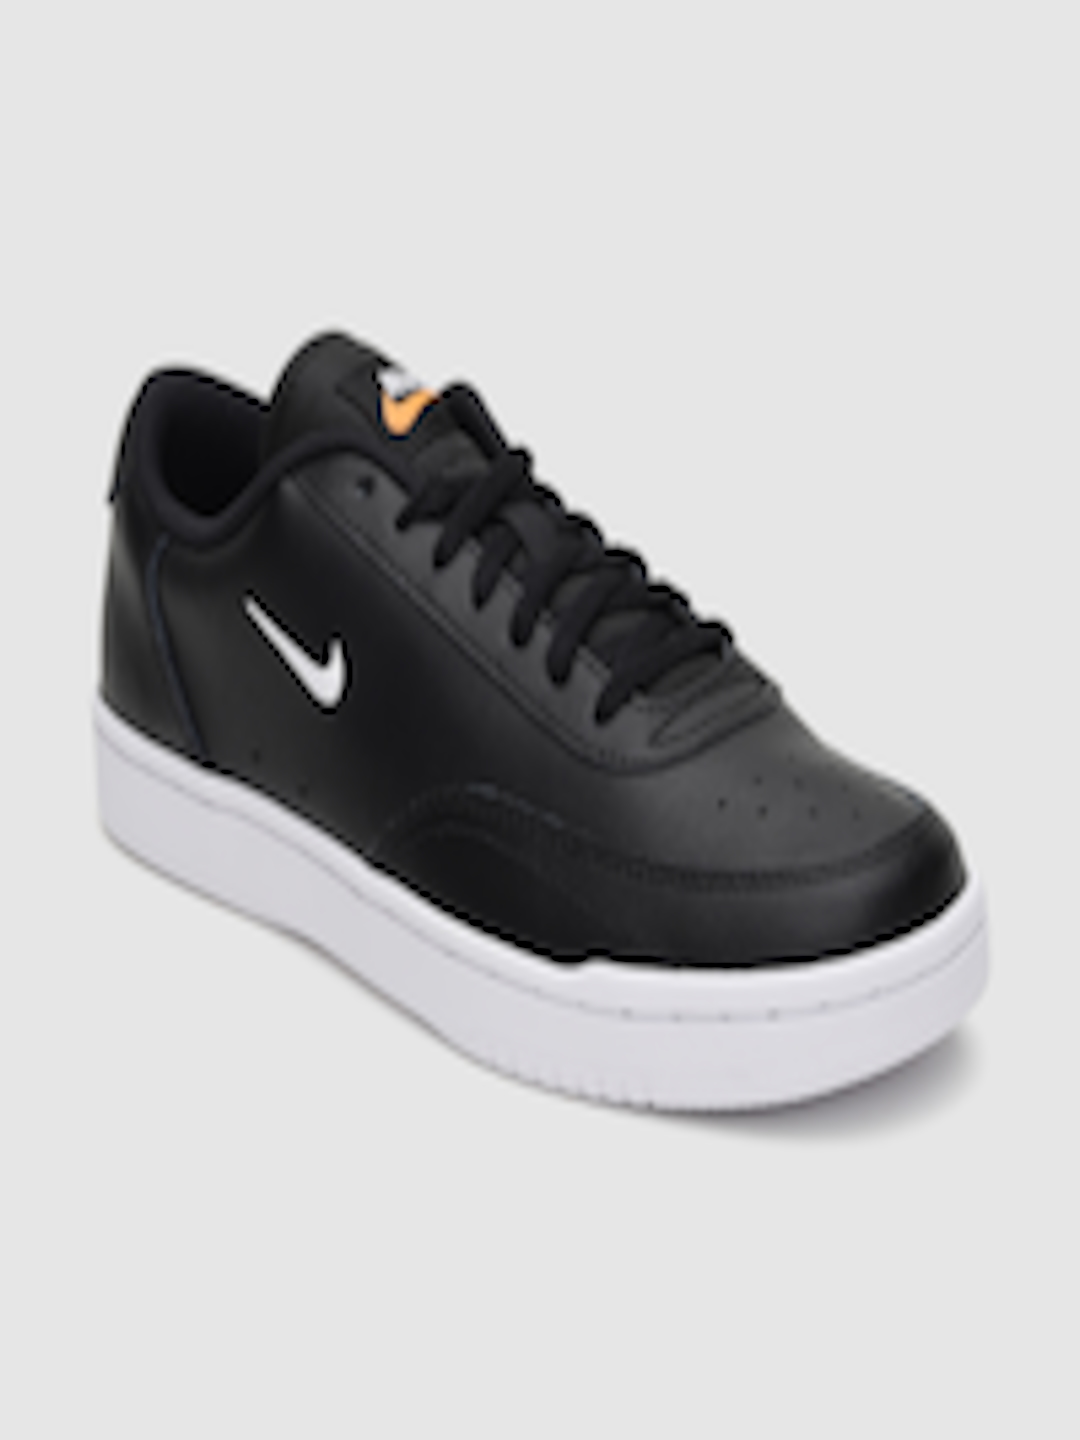 Buy Nike Women COURT VINTAGE Black Leather Sneakers - Casual Shoes for